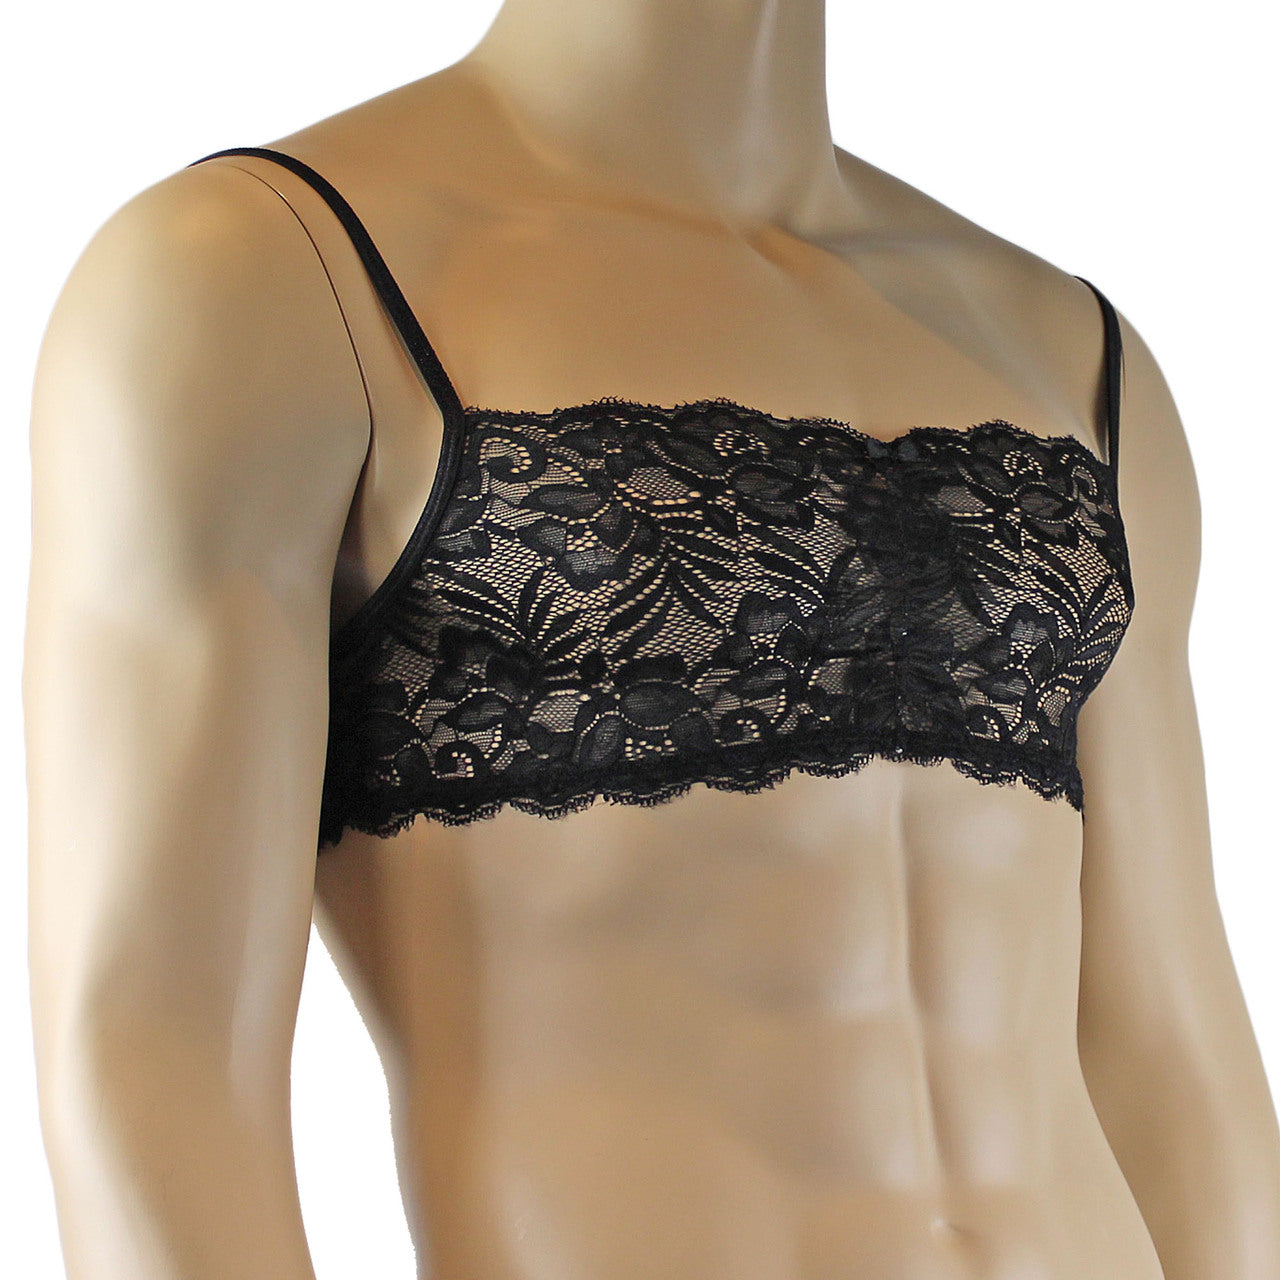 Mens Kristy Lingerie Bra Top in Lace with thin Straps Black